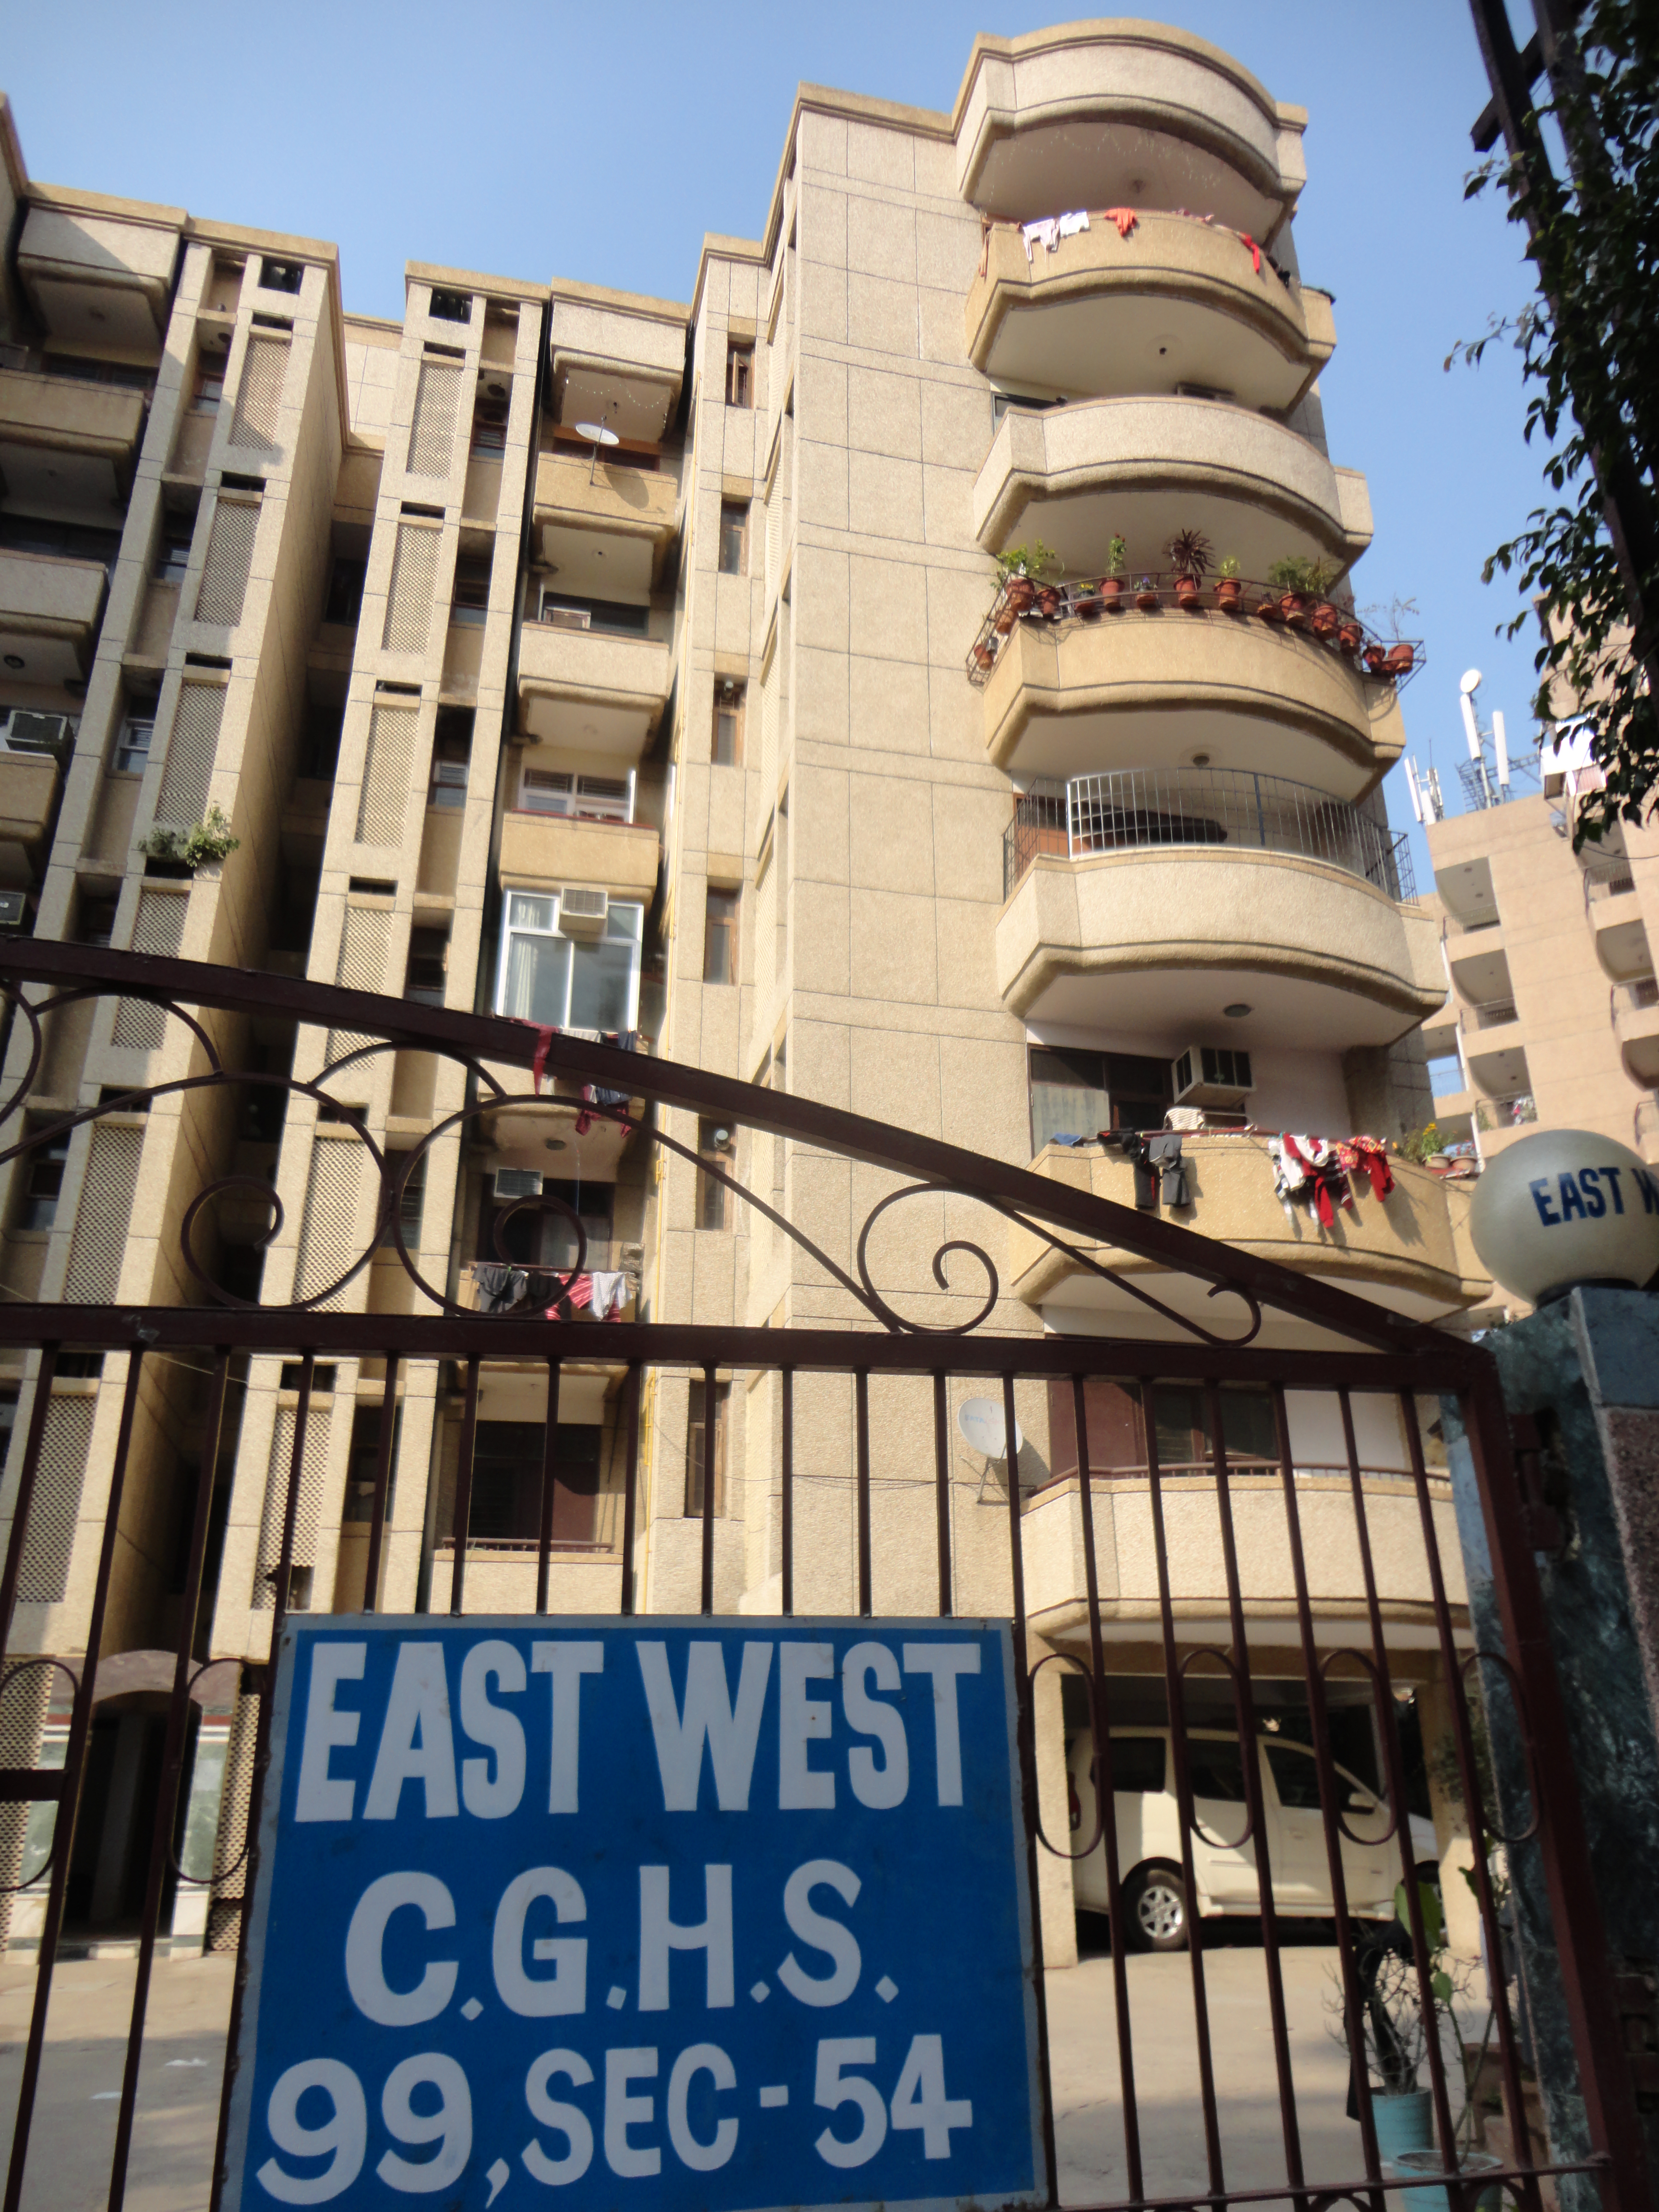 East West Apartments CGHS Project Deails